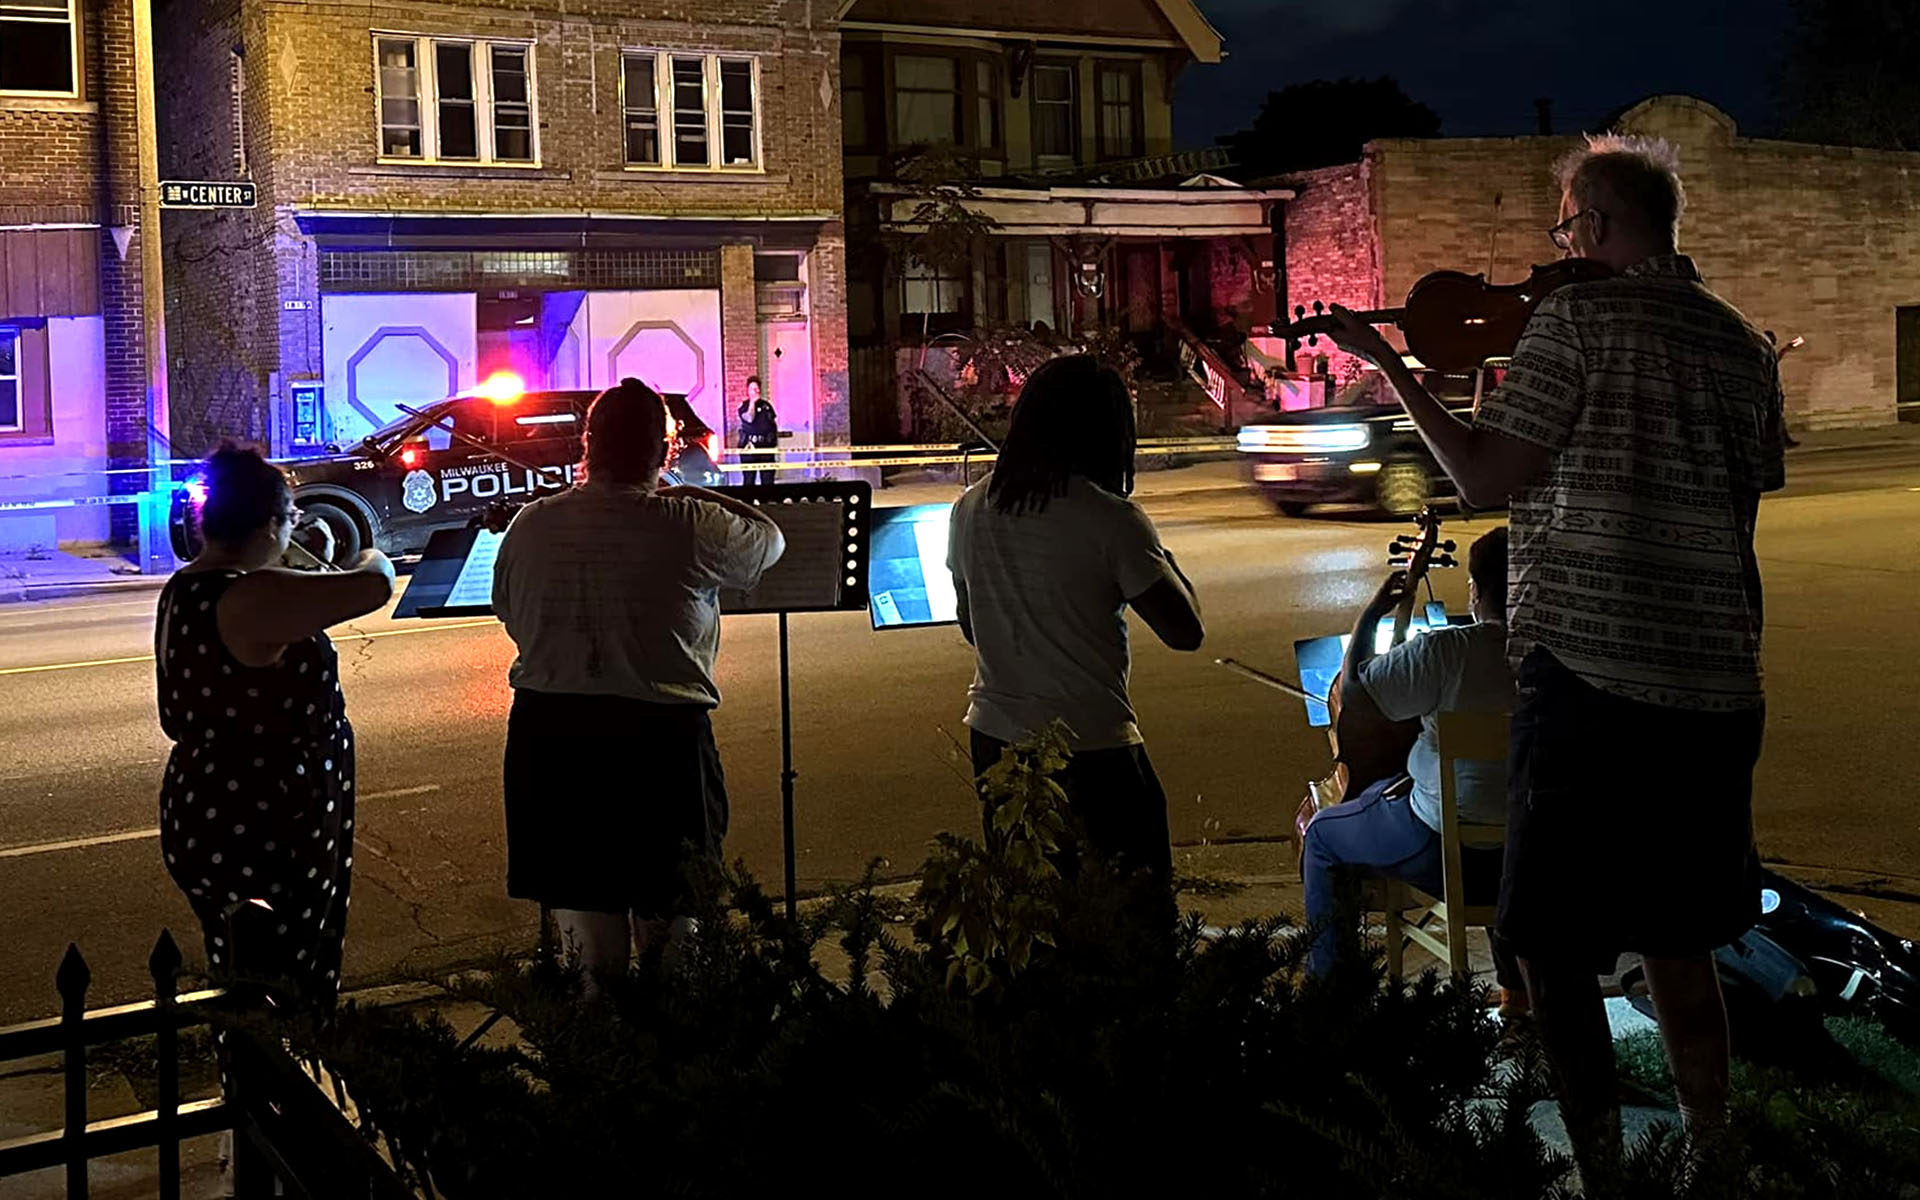 A group of five strings musicians performing at night on the sidewalk next to a police car and "do not cross" tape.